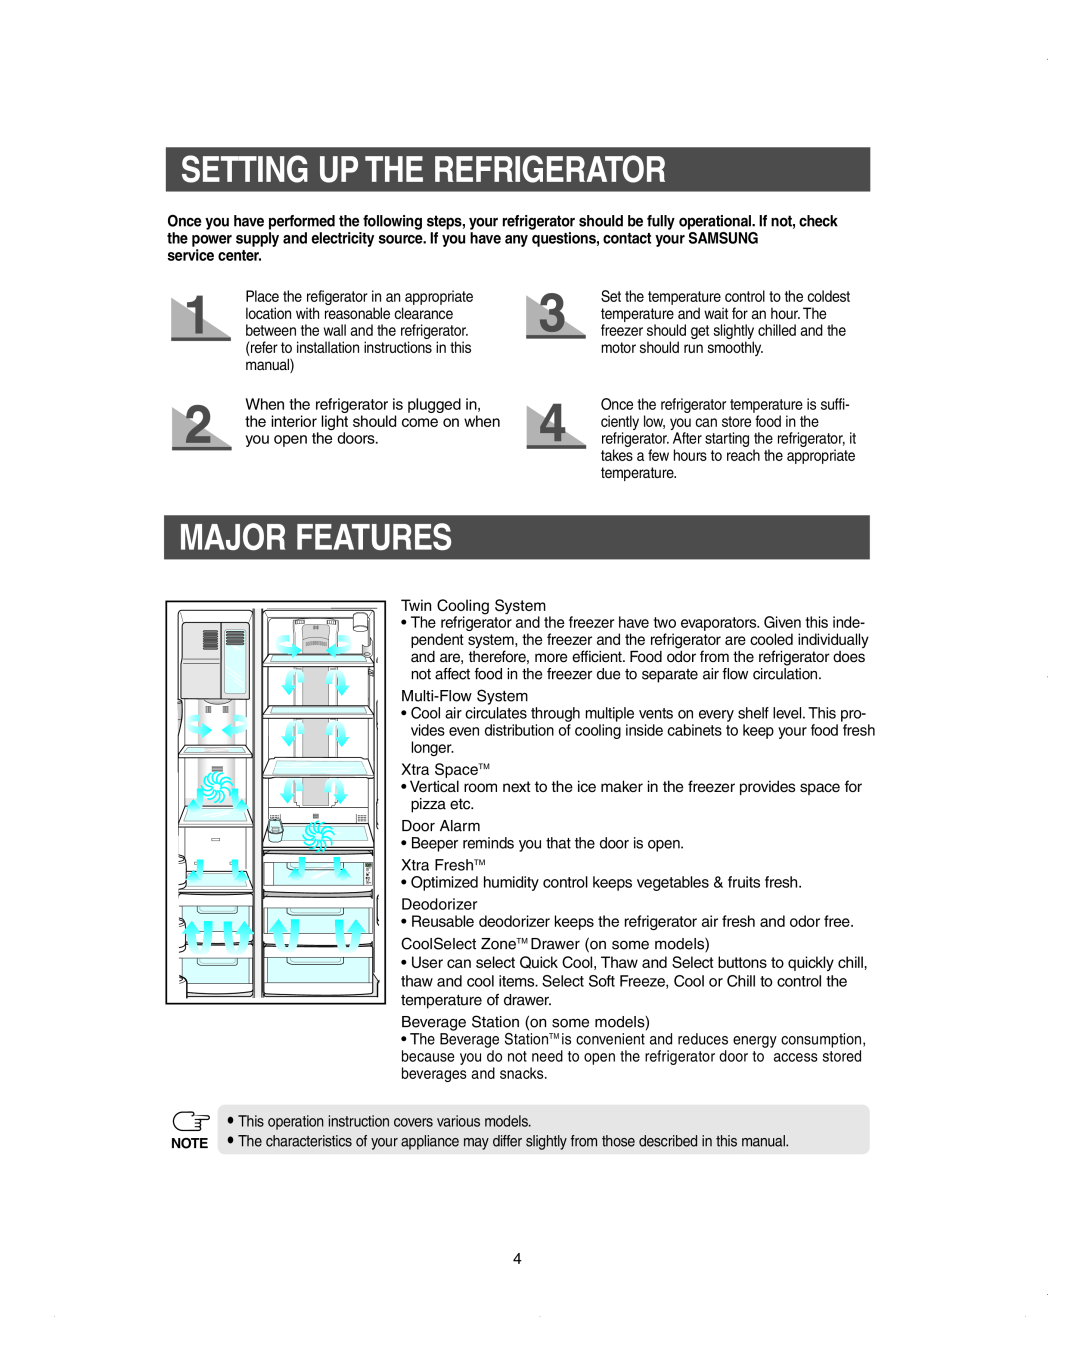 Samsung DA99-01278C owner manual Setting Up The Refrigerator, Major Features, service center 